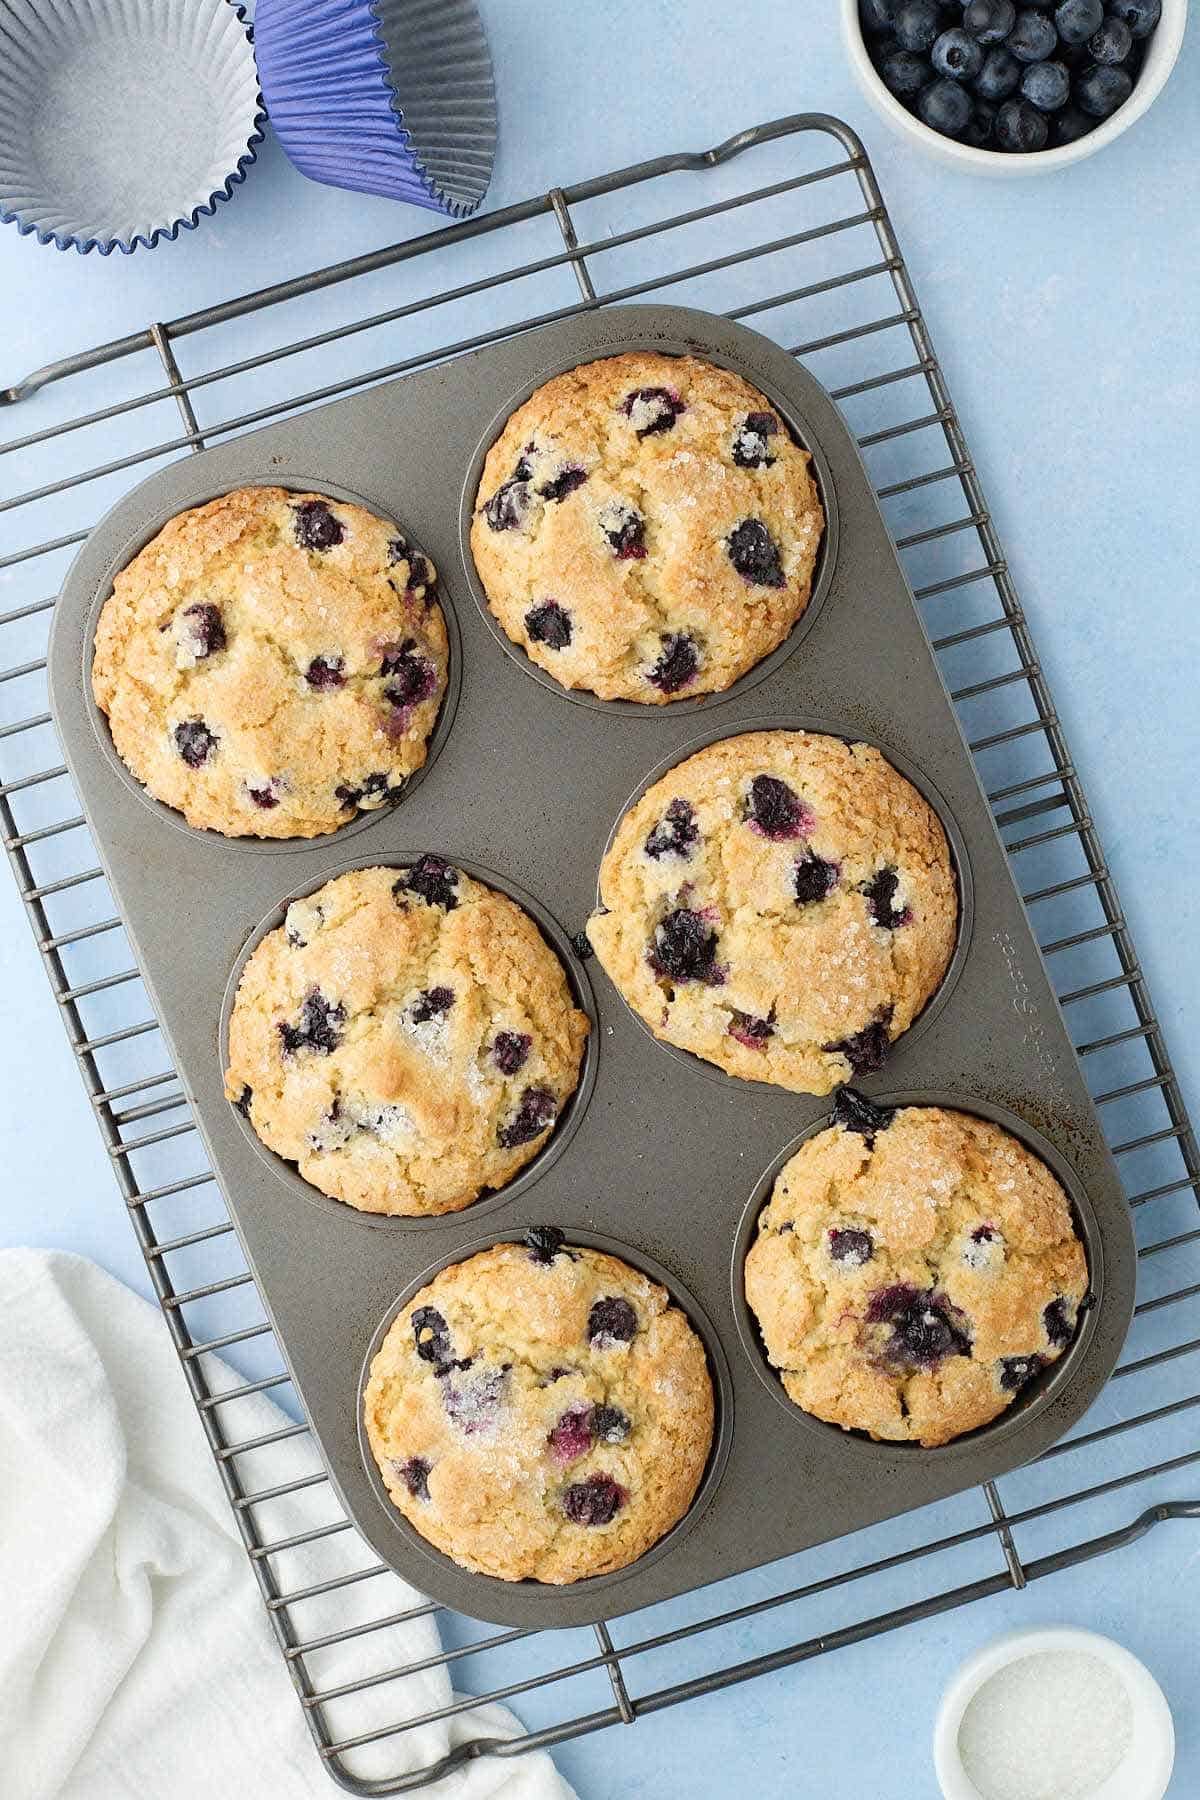 Overhead view of baked buttermilk blueberry muffins on a cooling rack.